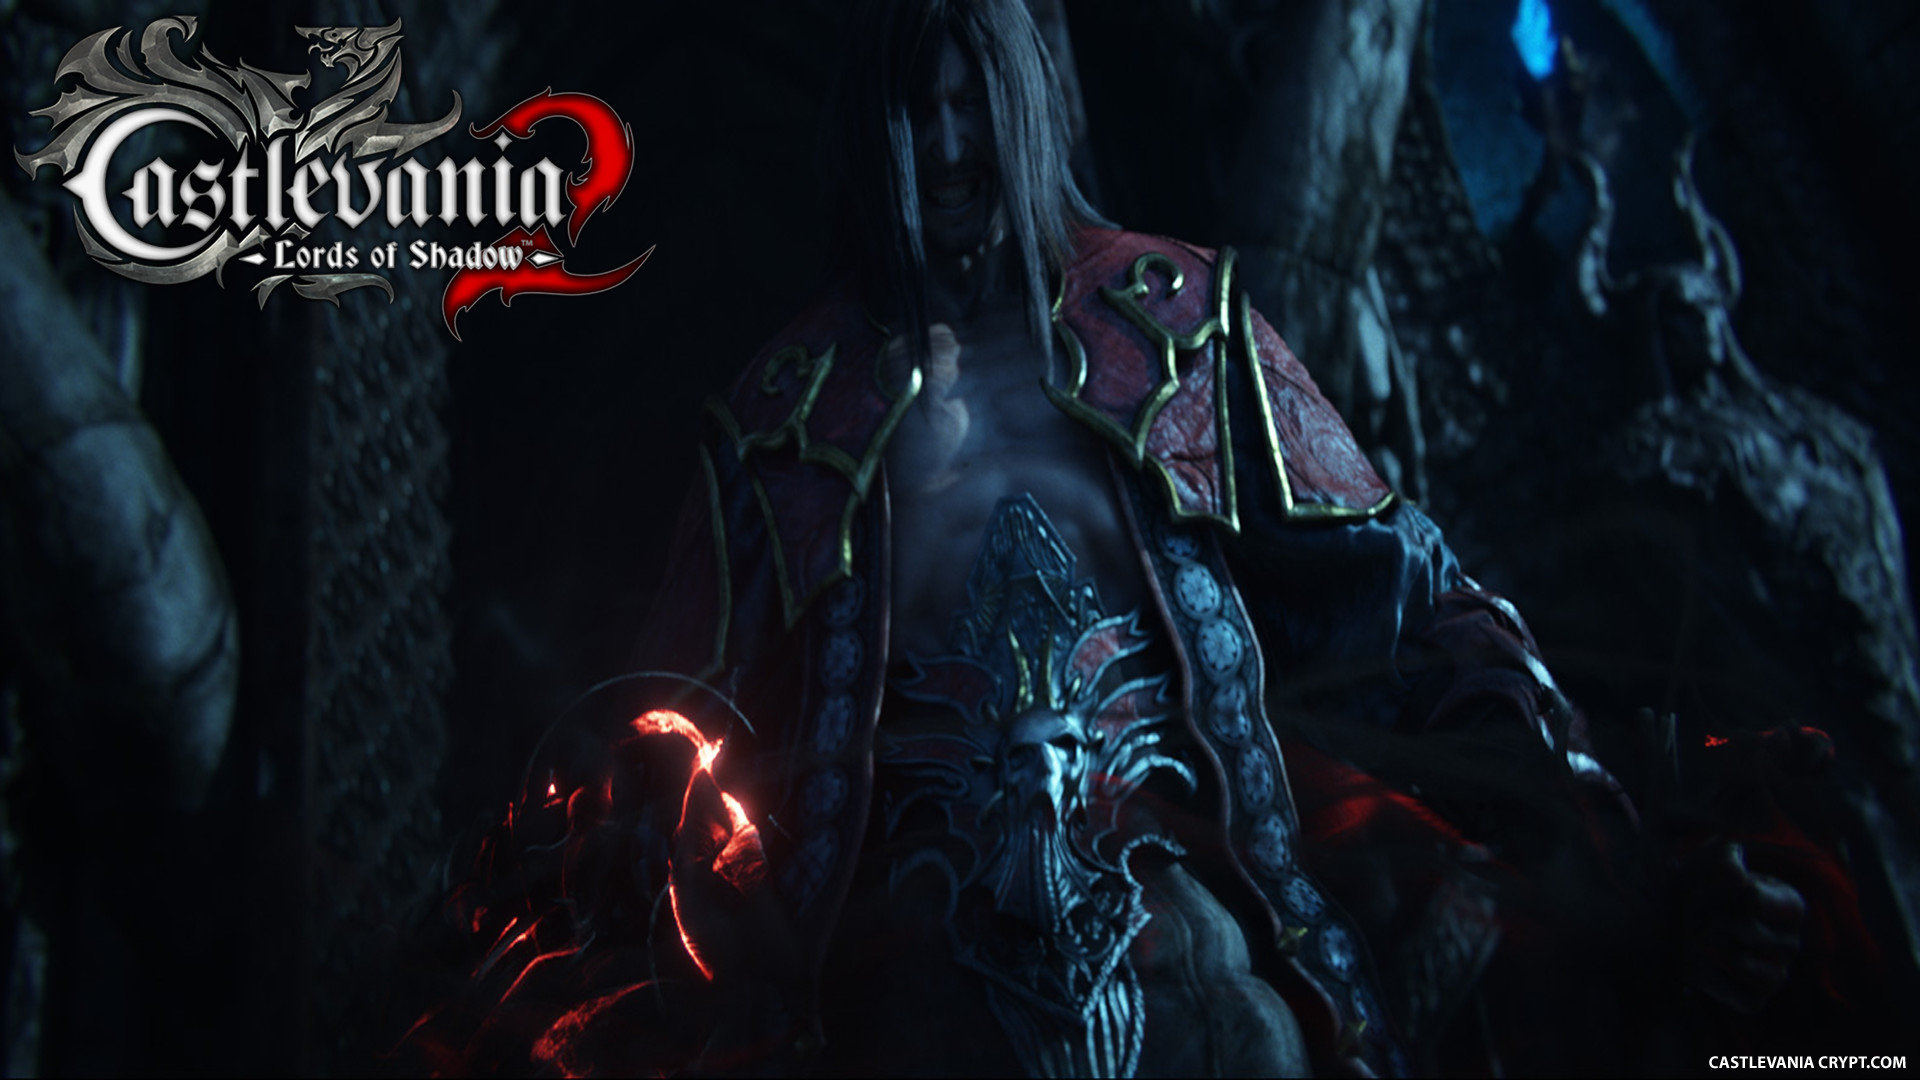 Best Castlevania: Lords Of Shadow 2 wallpaper ID:83481 for High Resolution hd 1080p PC